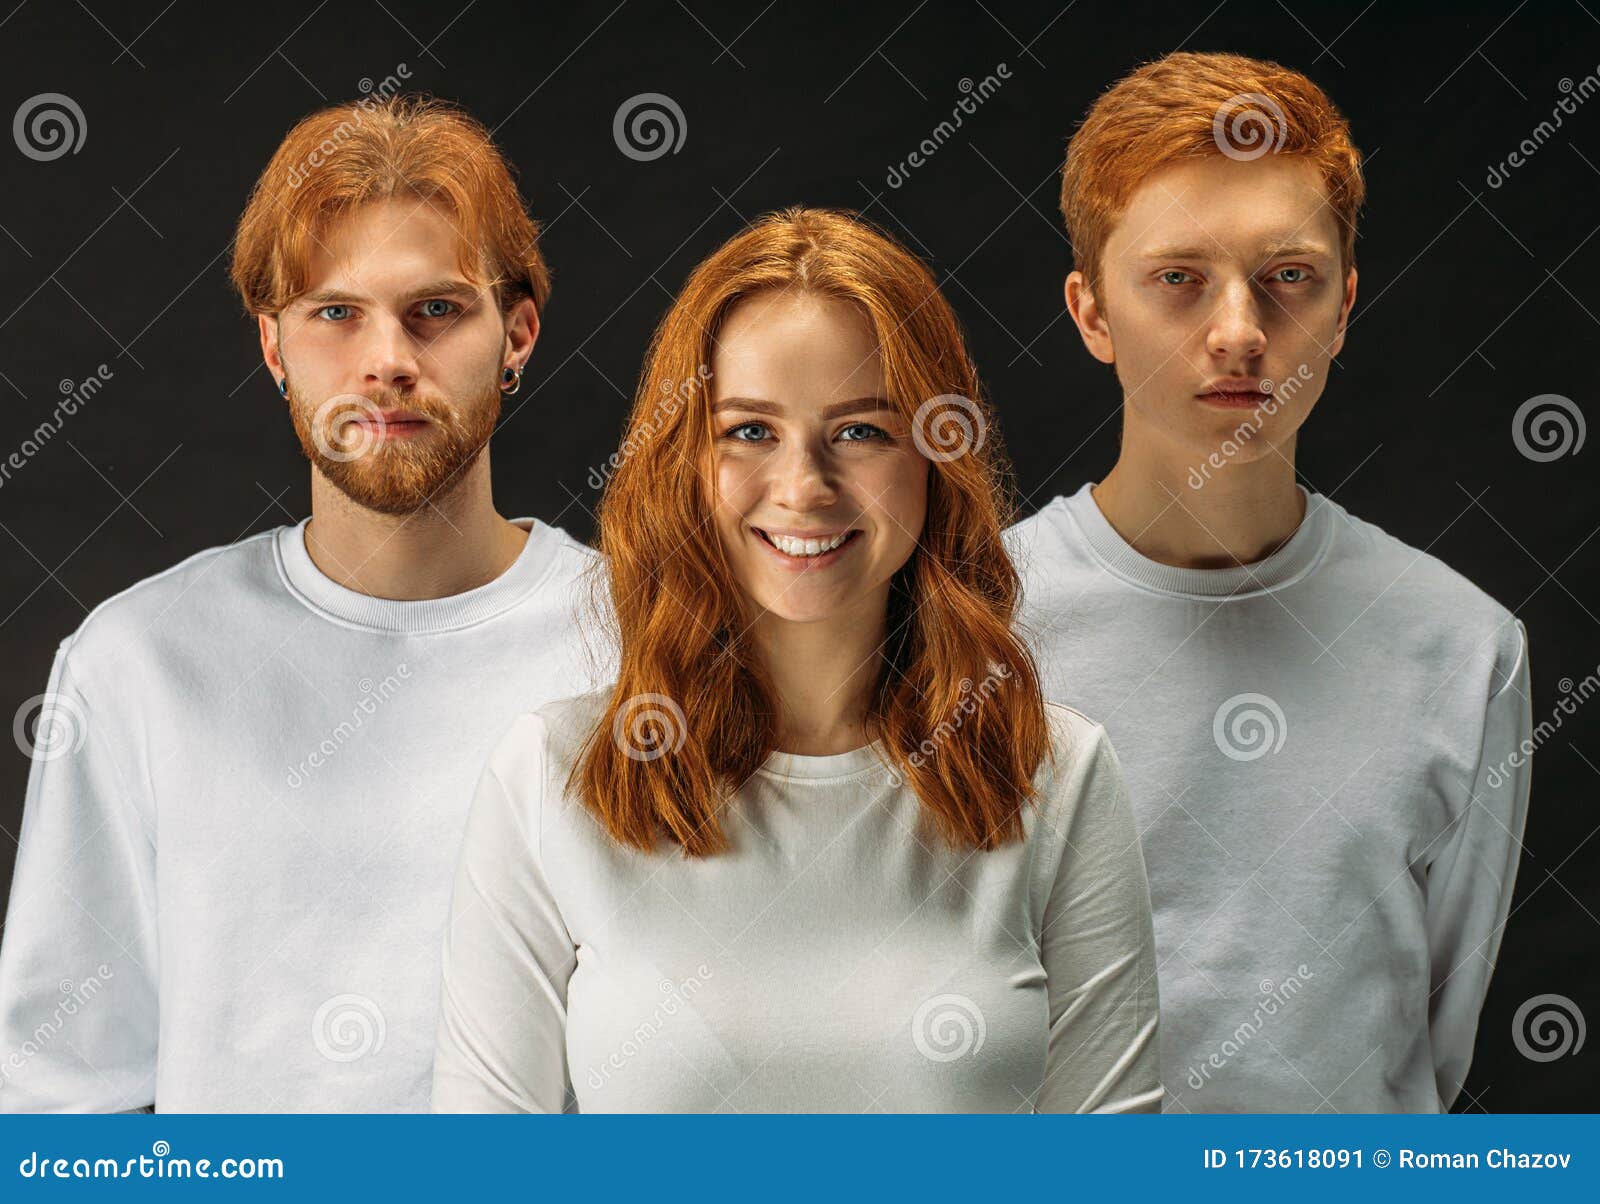 Beautiful People With Unusual Hair Colour Stock Image Image Of